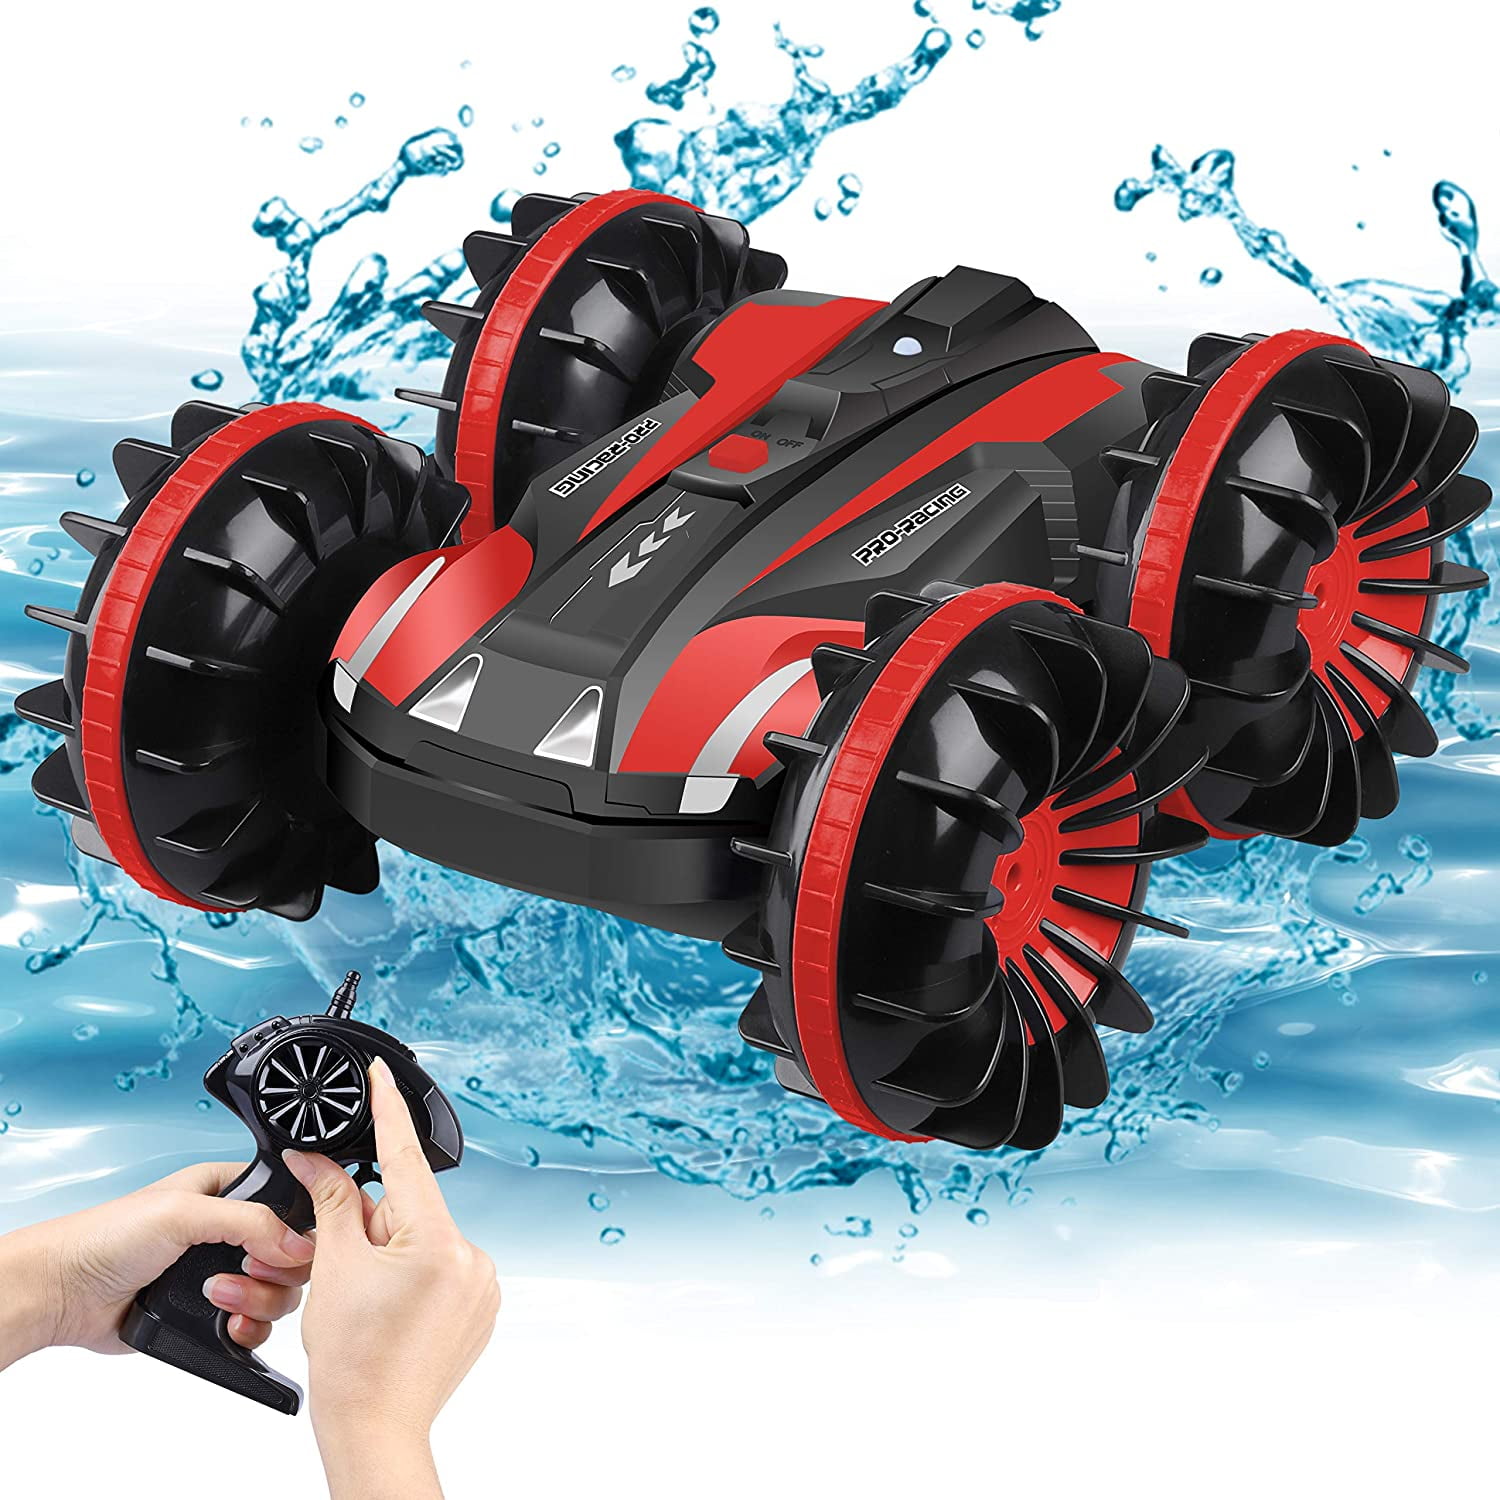 Amphibious RC Car For Kids Toys For 512 Year